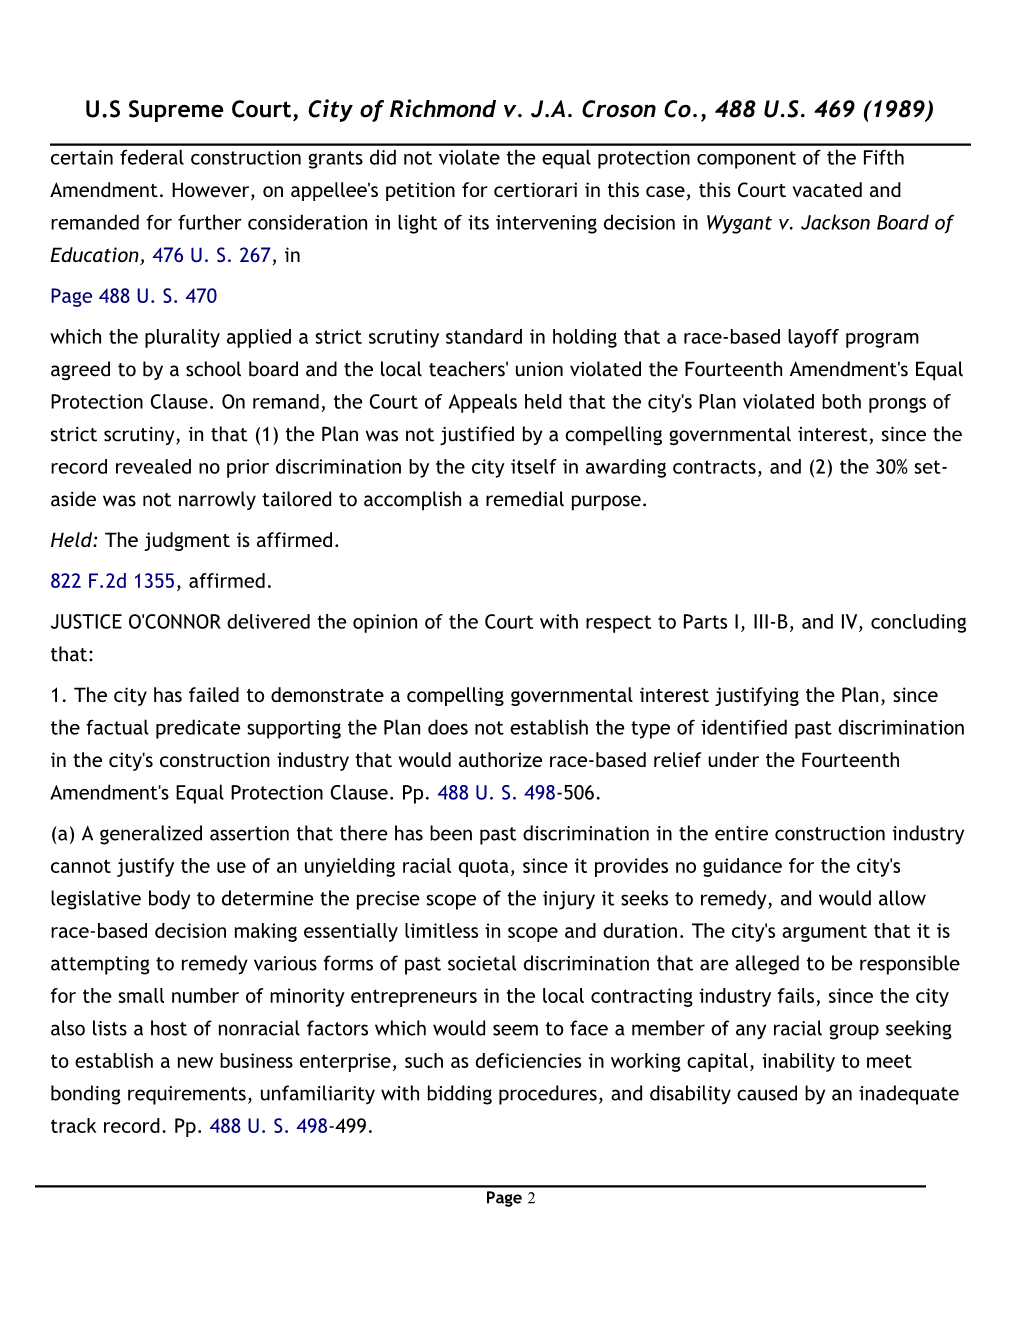 Appeal from the United States Court of Appeals For